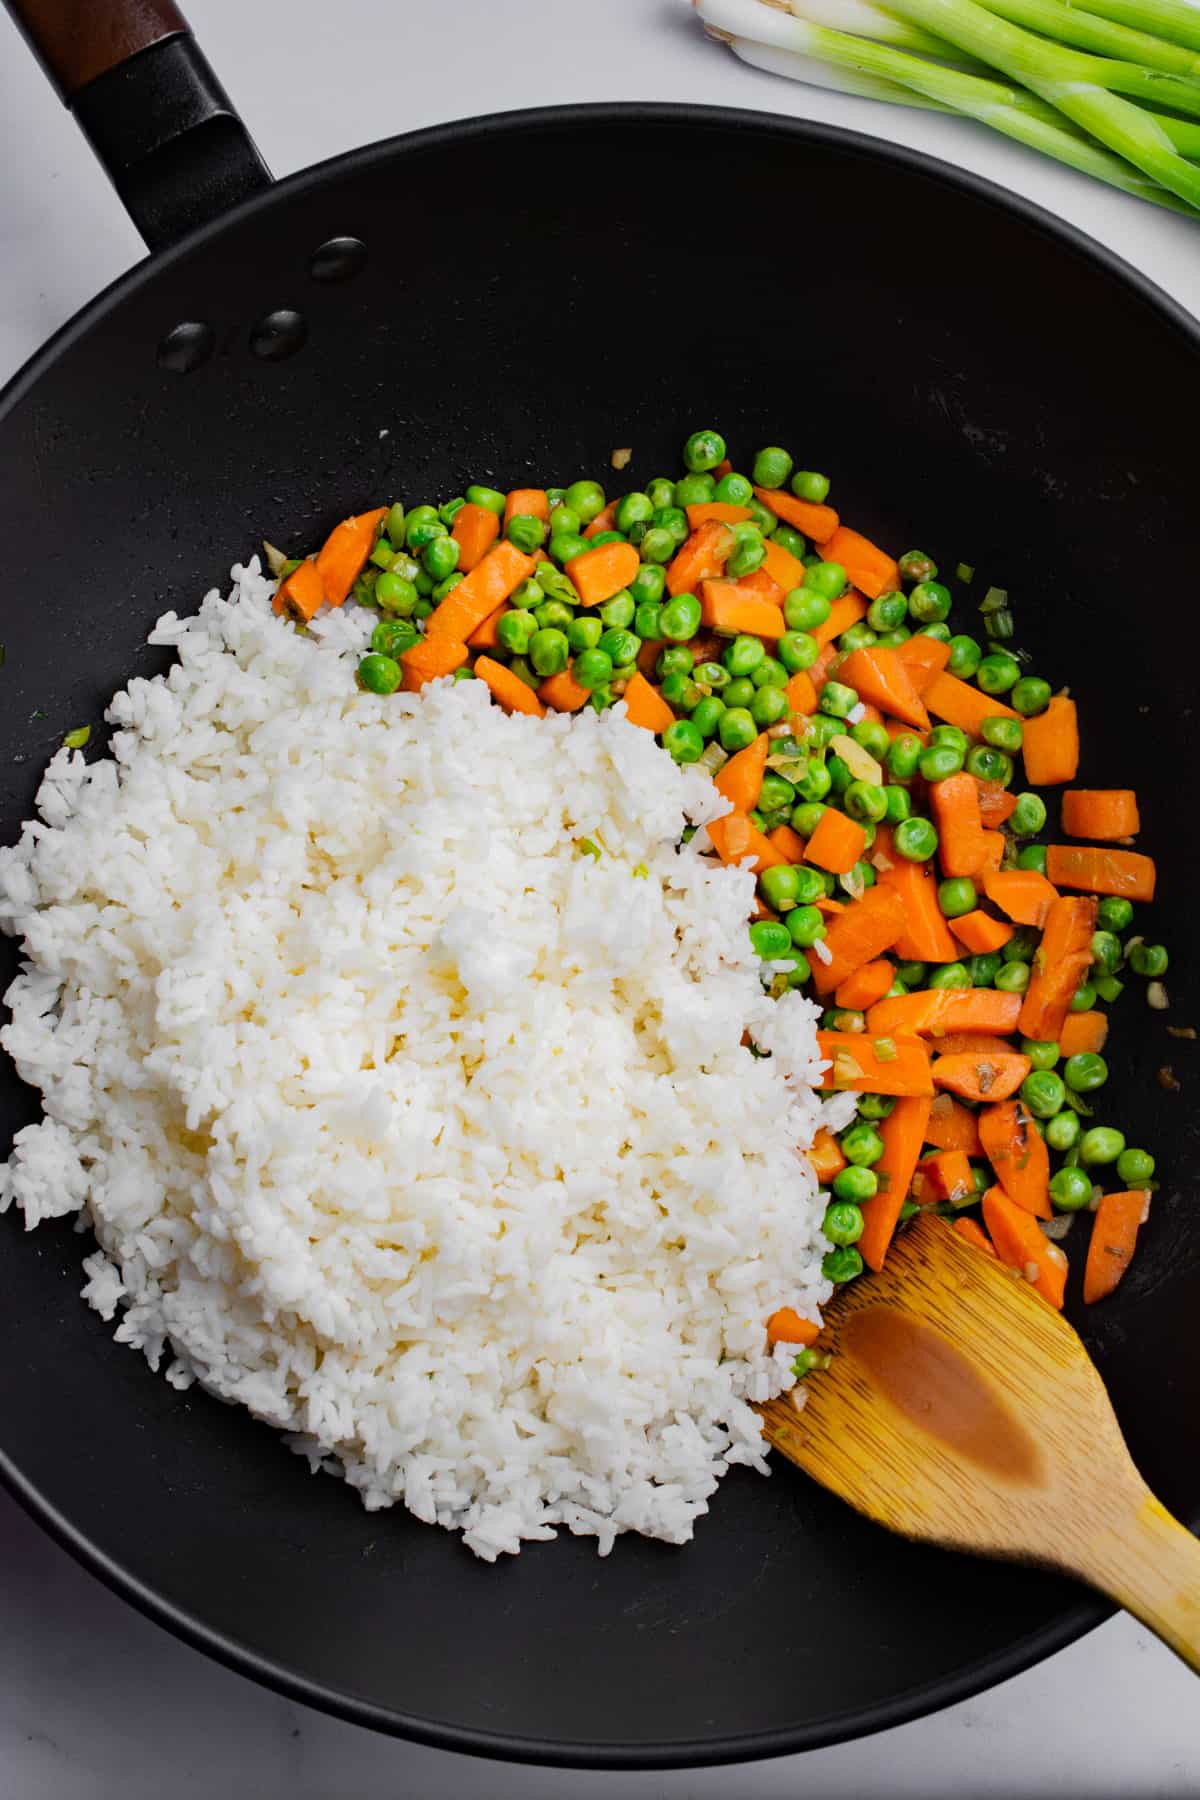 White rice, peas and carrots in a wok.